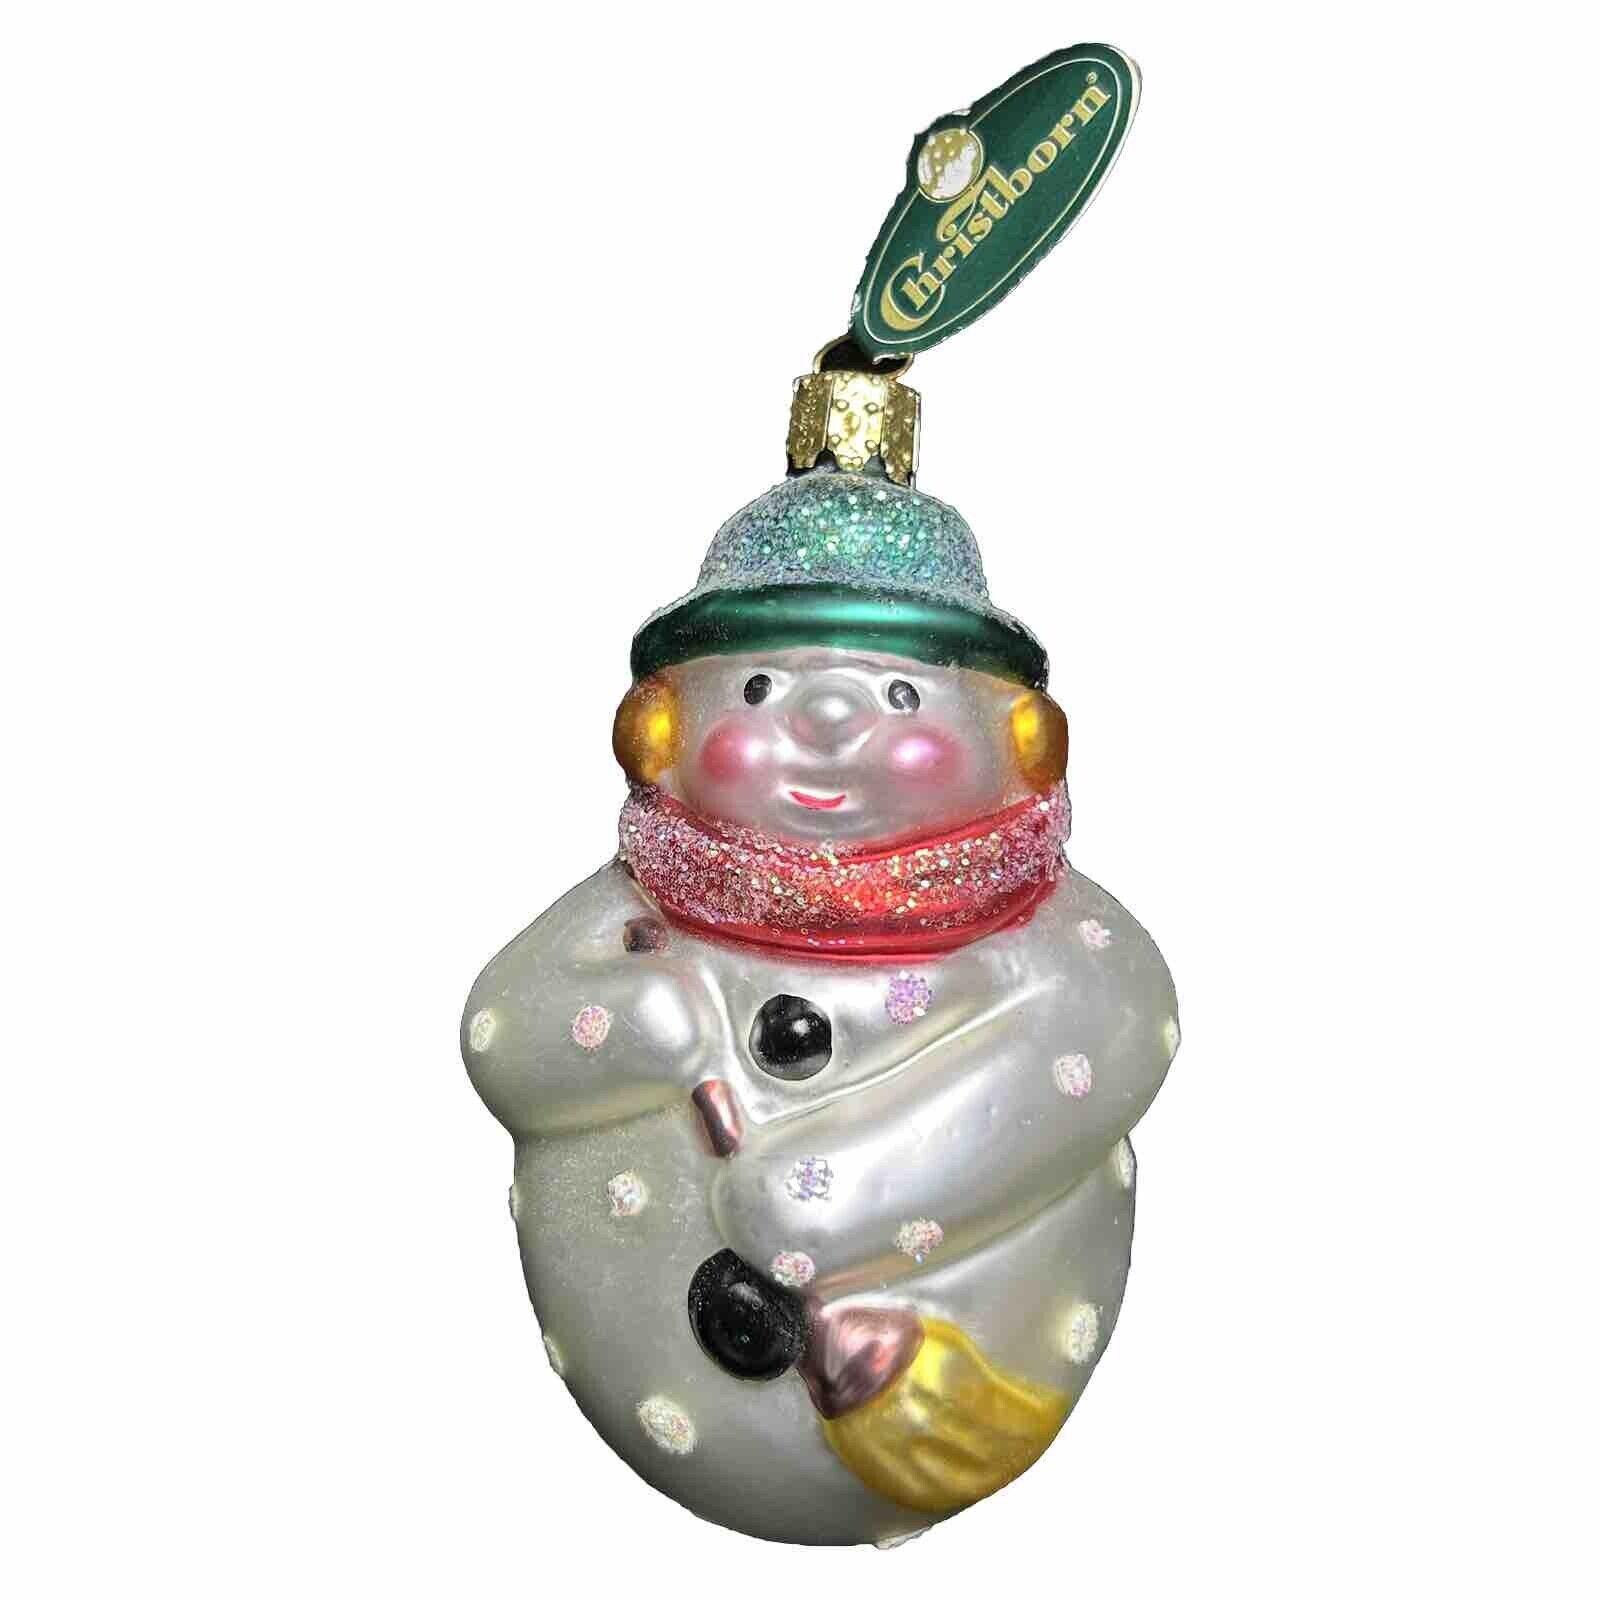 Vintage Christborn Handblown Ornament Snowman Christmas Made In Germany